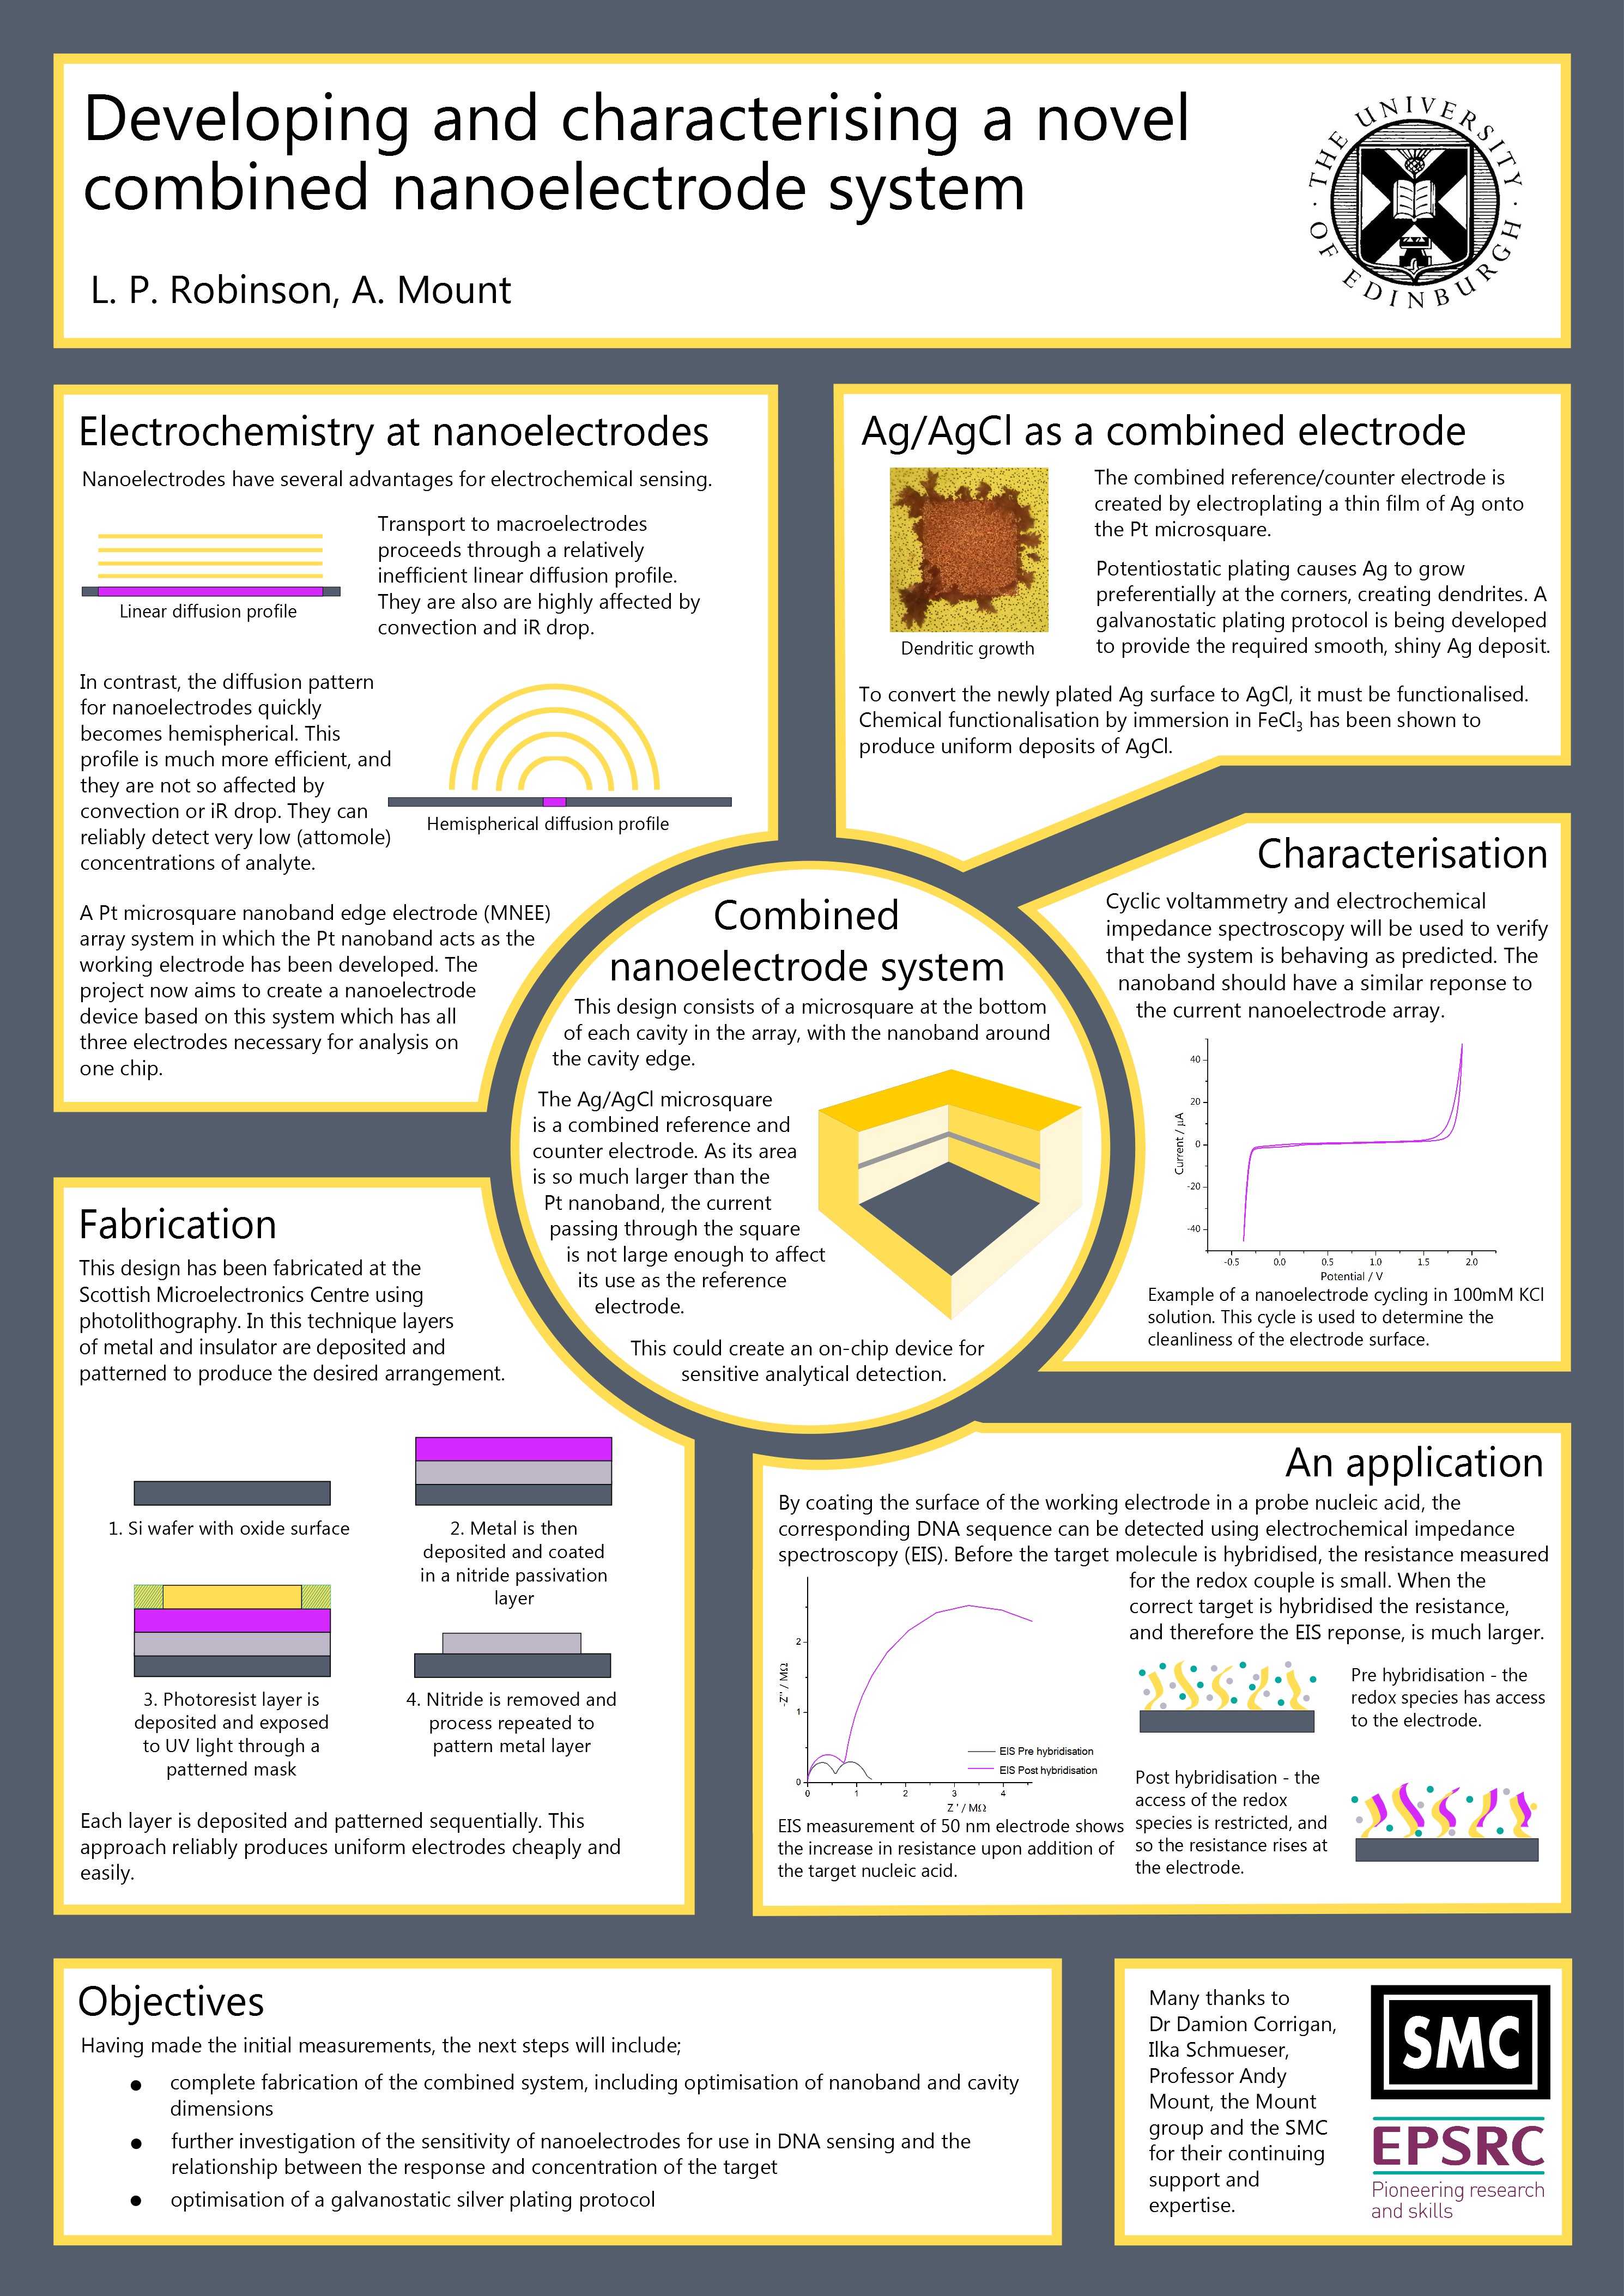 Pin By Lin On ACADEMIC POSTER Pinterest Scientific Poster Design Chemistry